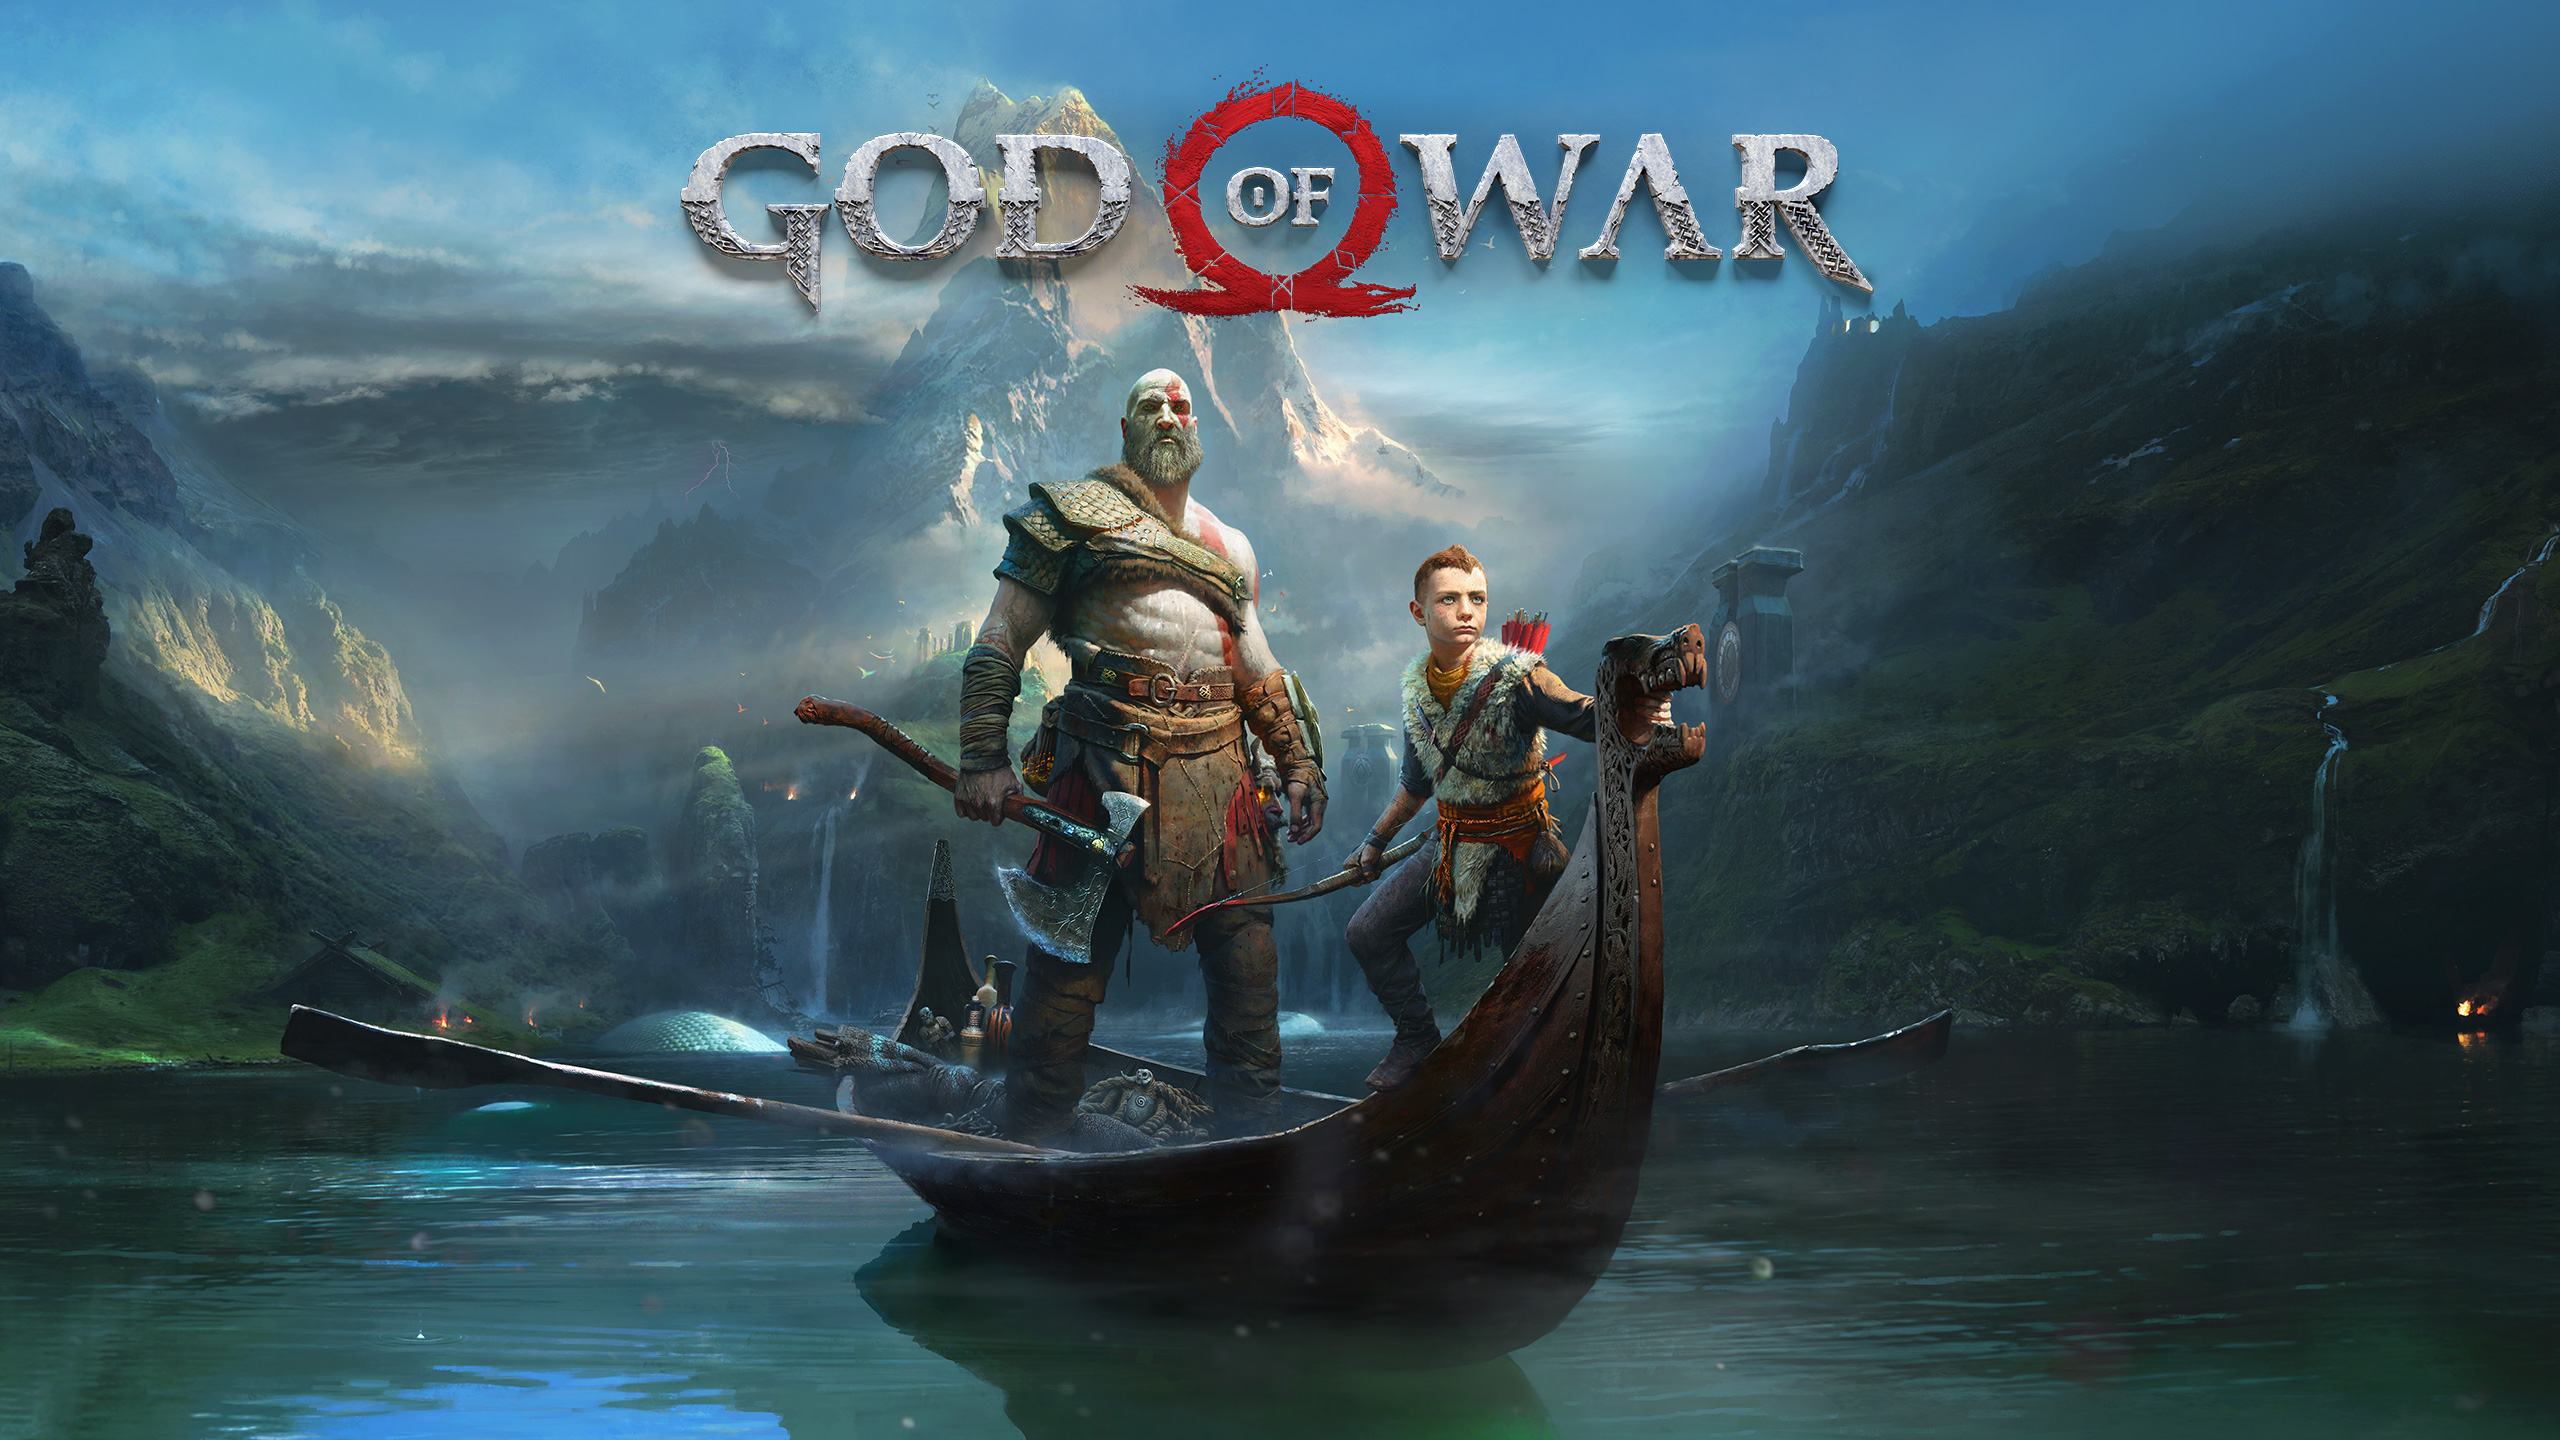 God of War+PATCHES+Account+Region Free🌎Steam